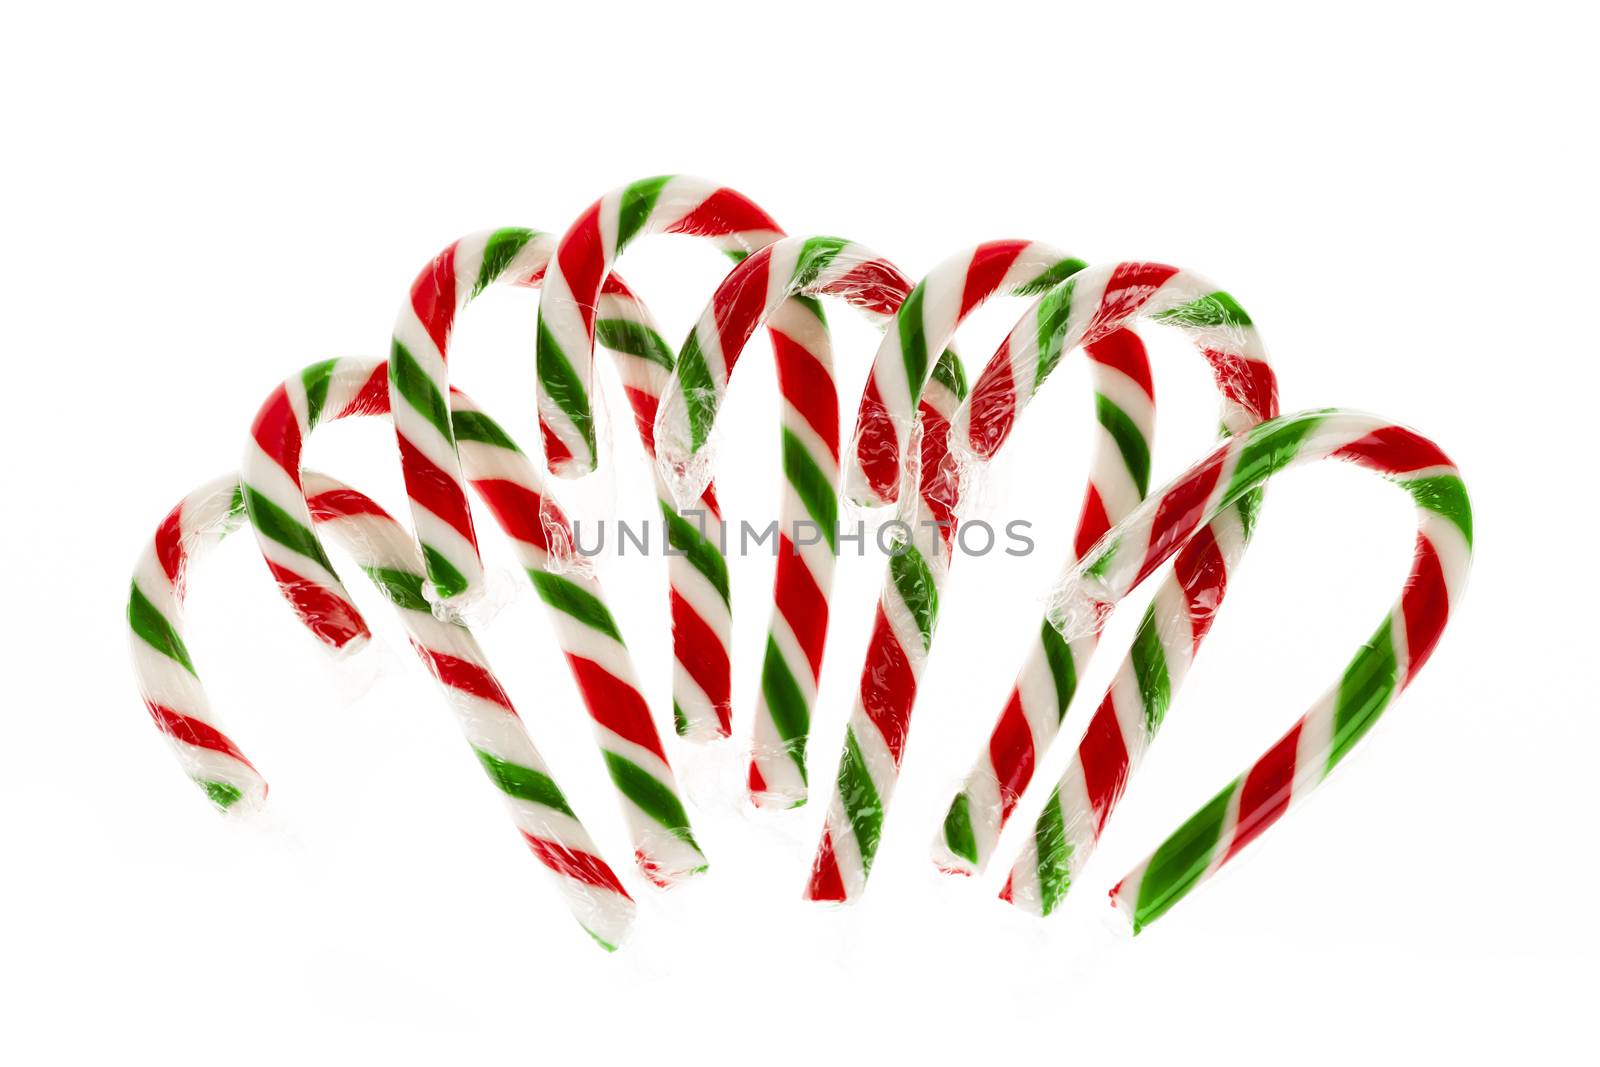 Candy canes by elenathewise